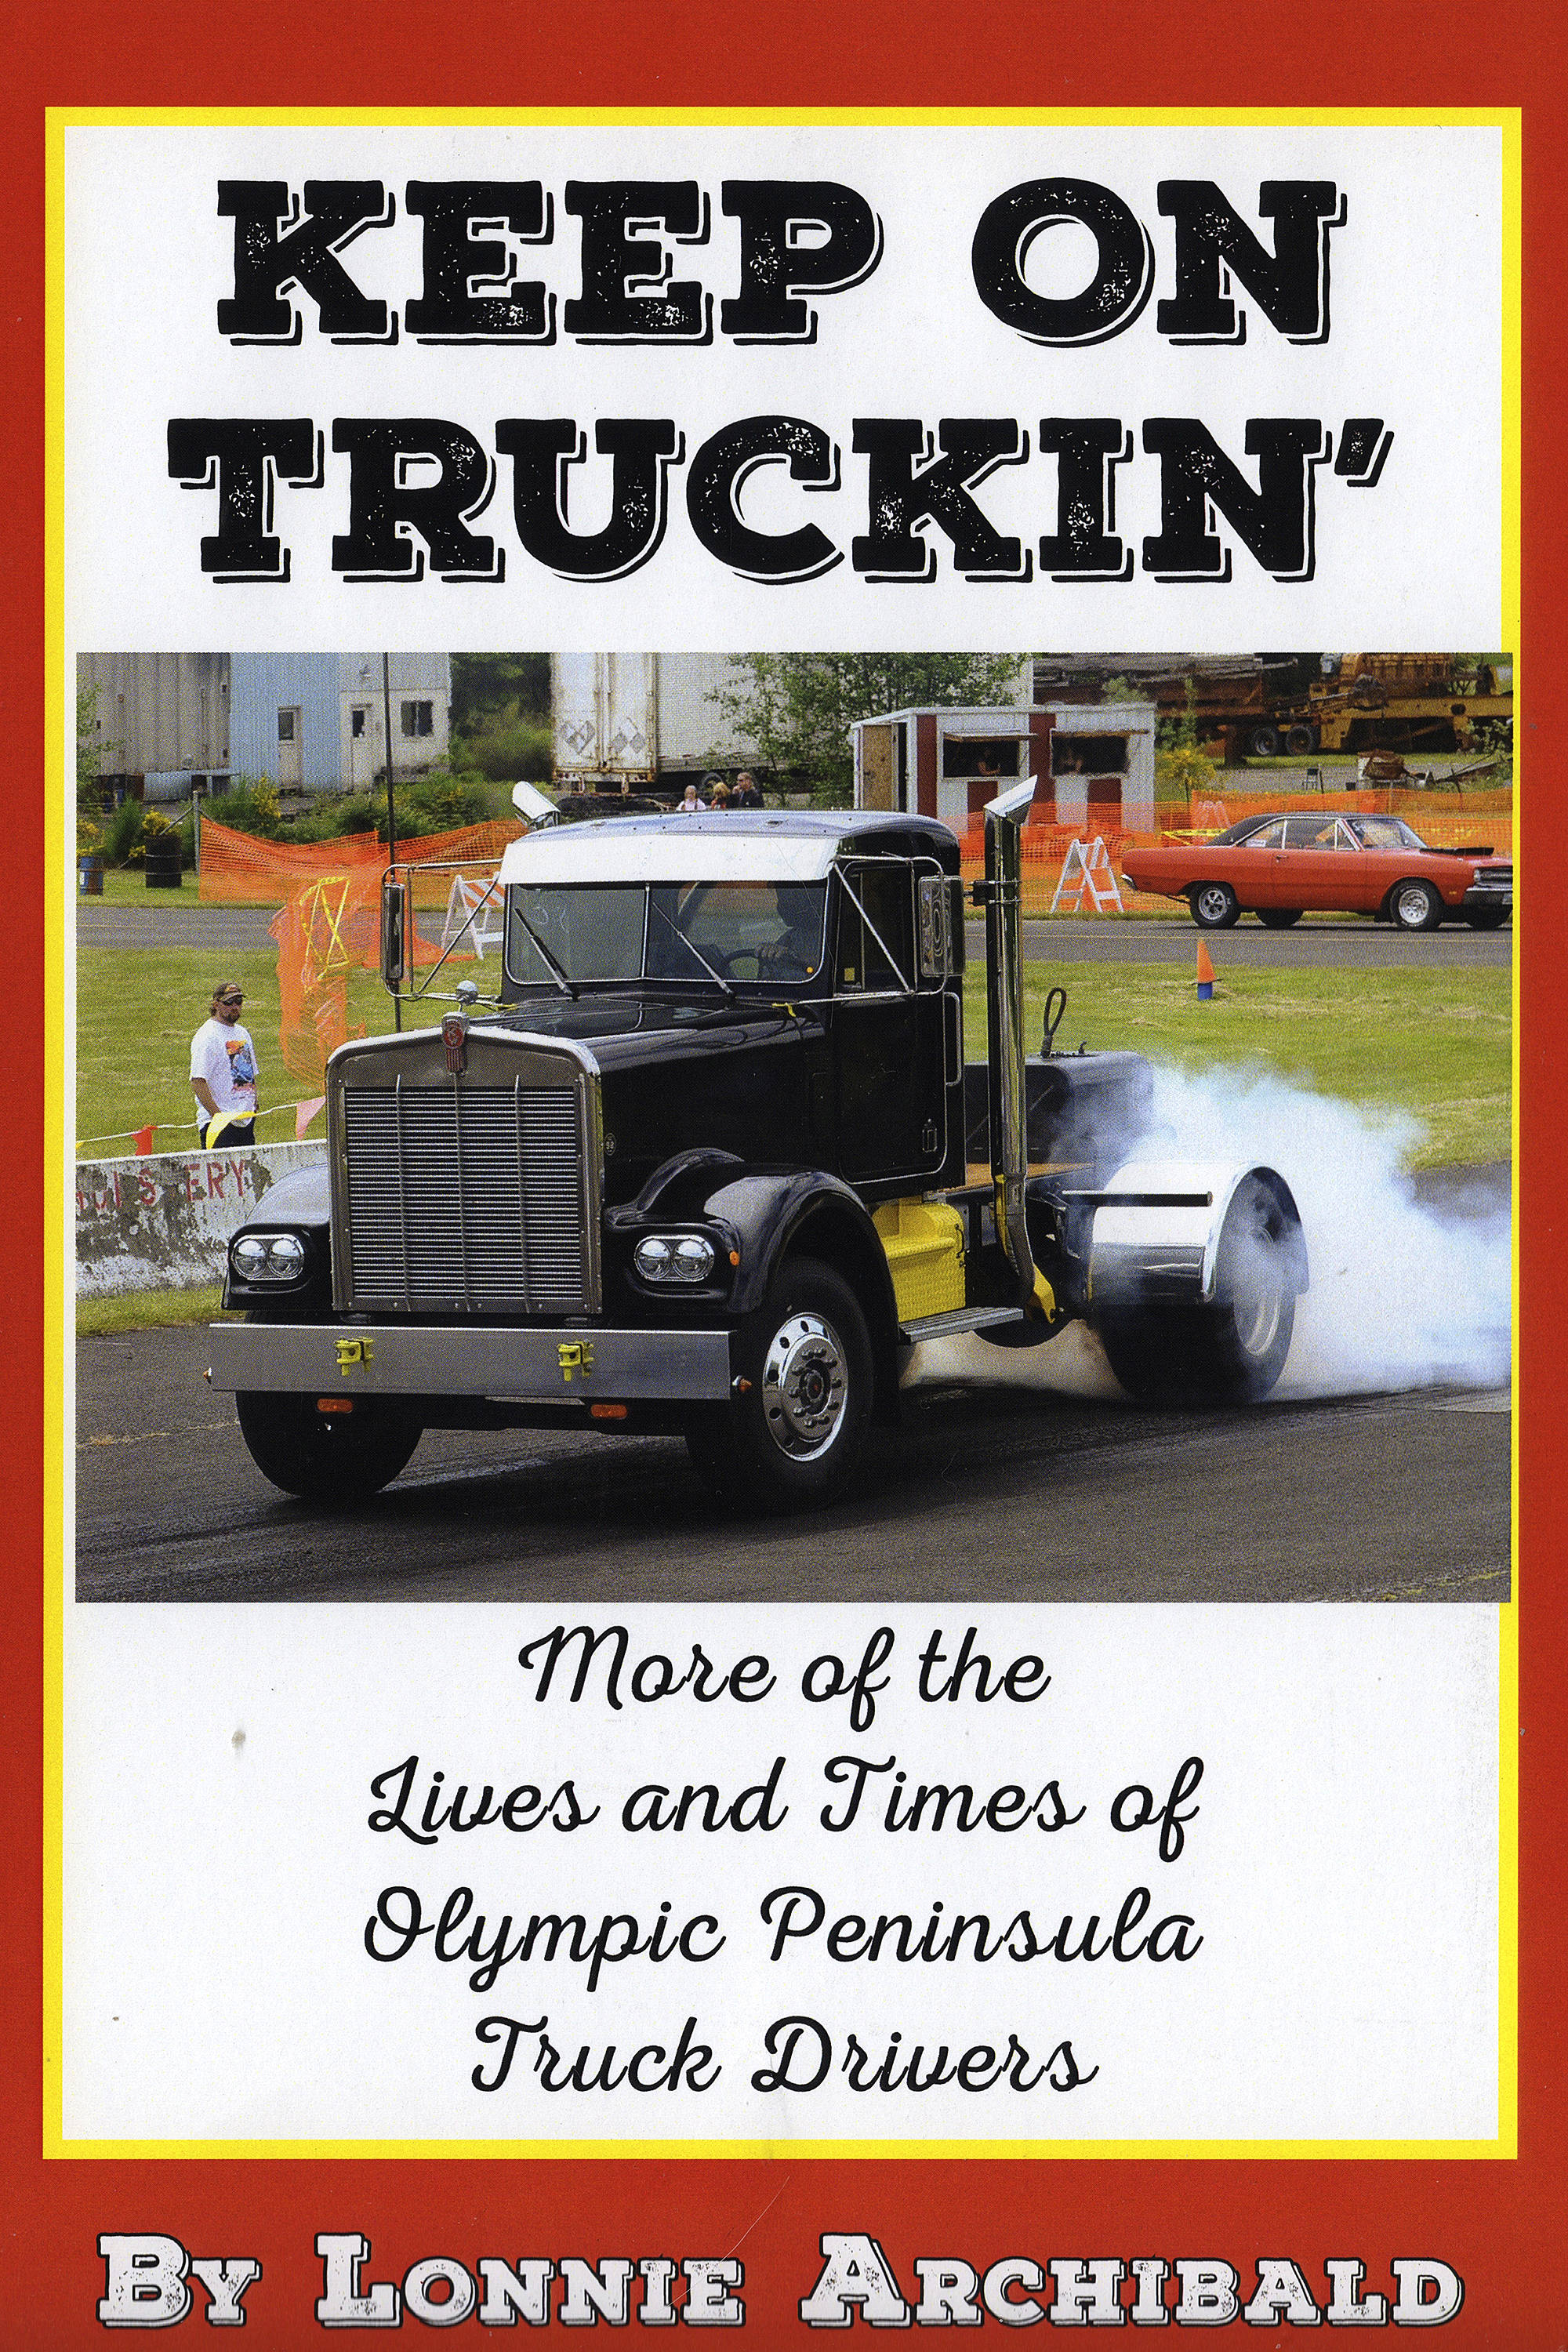 Archibald’s book details life of peninsula truckers